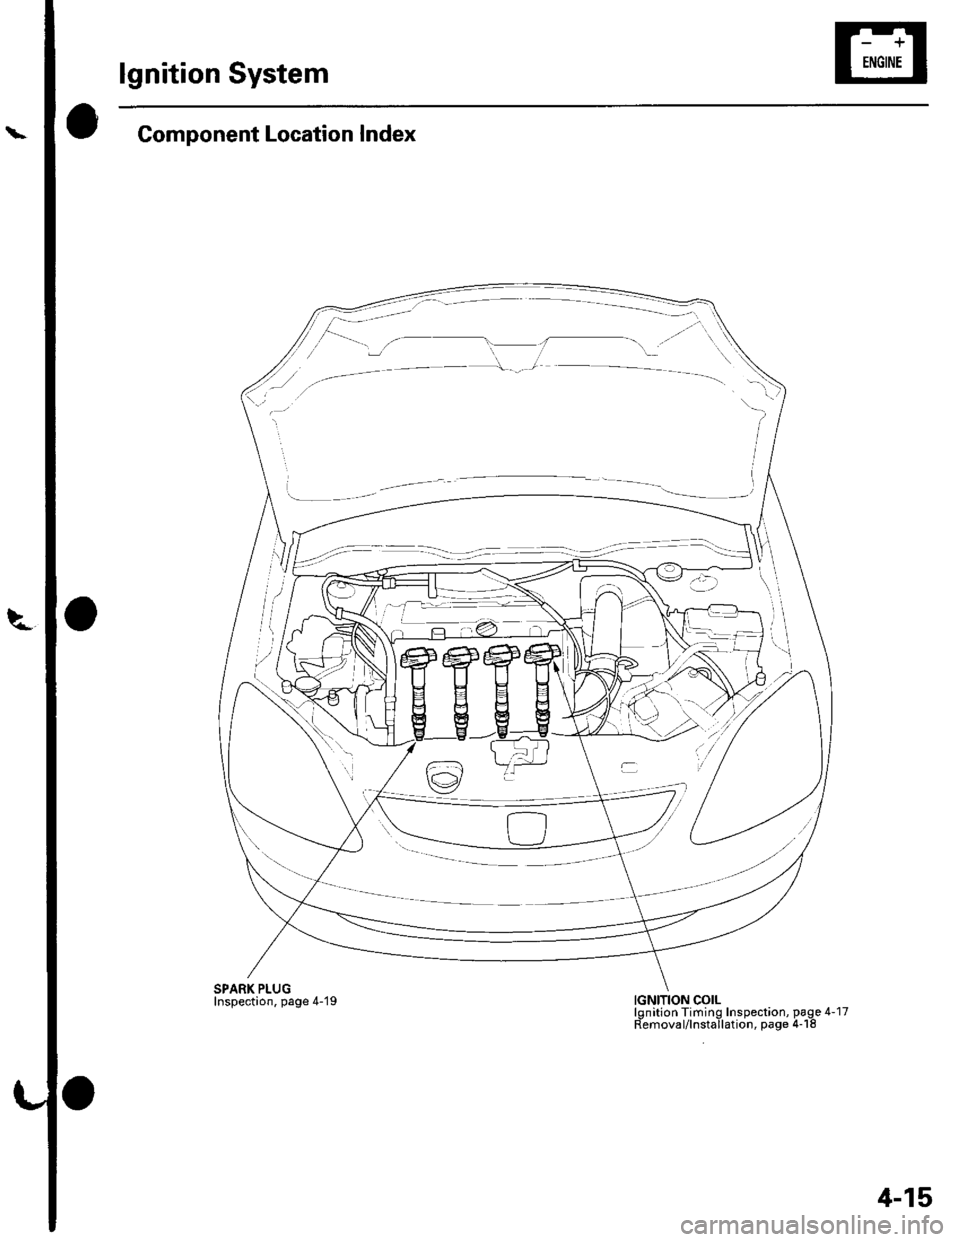 HONDA CIVIC 2003 7.G Service Manual lgnition System
Component Location Index
SPARK PLUGInspection, page 4-19IGNITION COILlgnition Timing Inspection, page 4-17Removal/lnstallation, page 4-18
4-15 